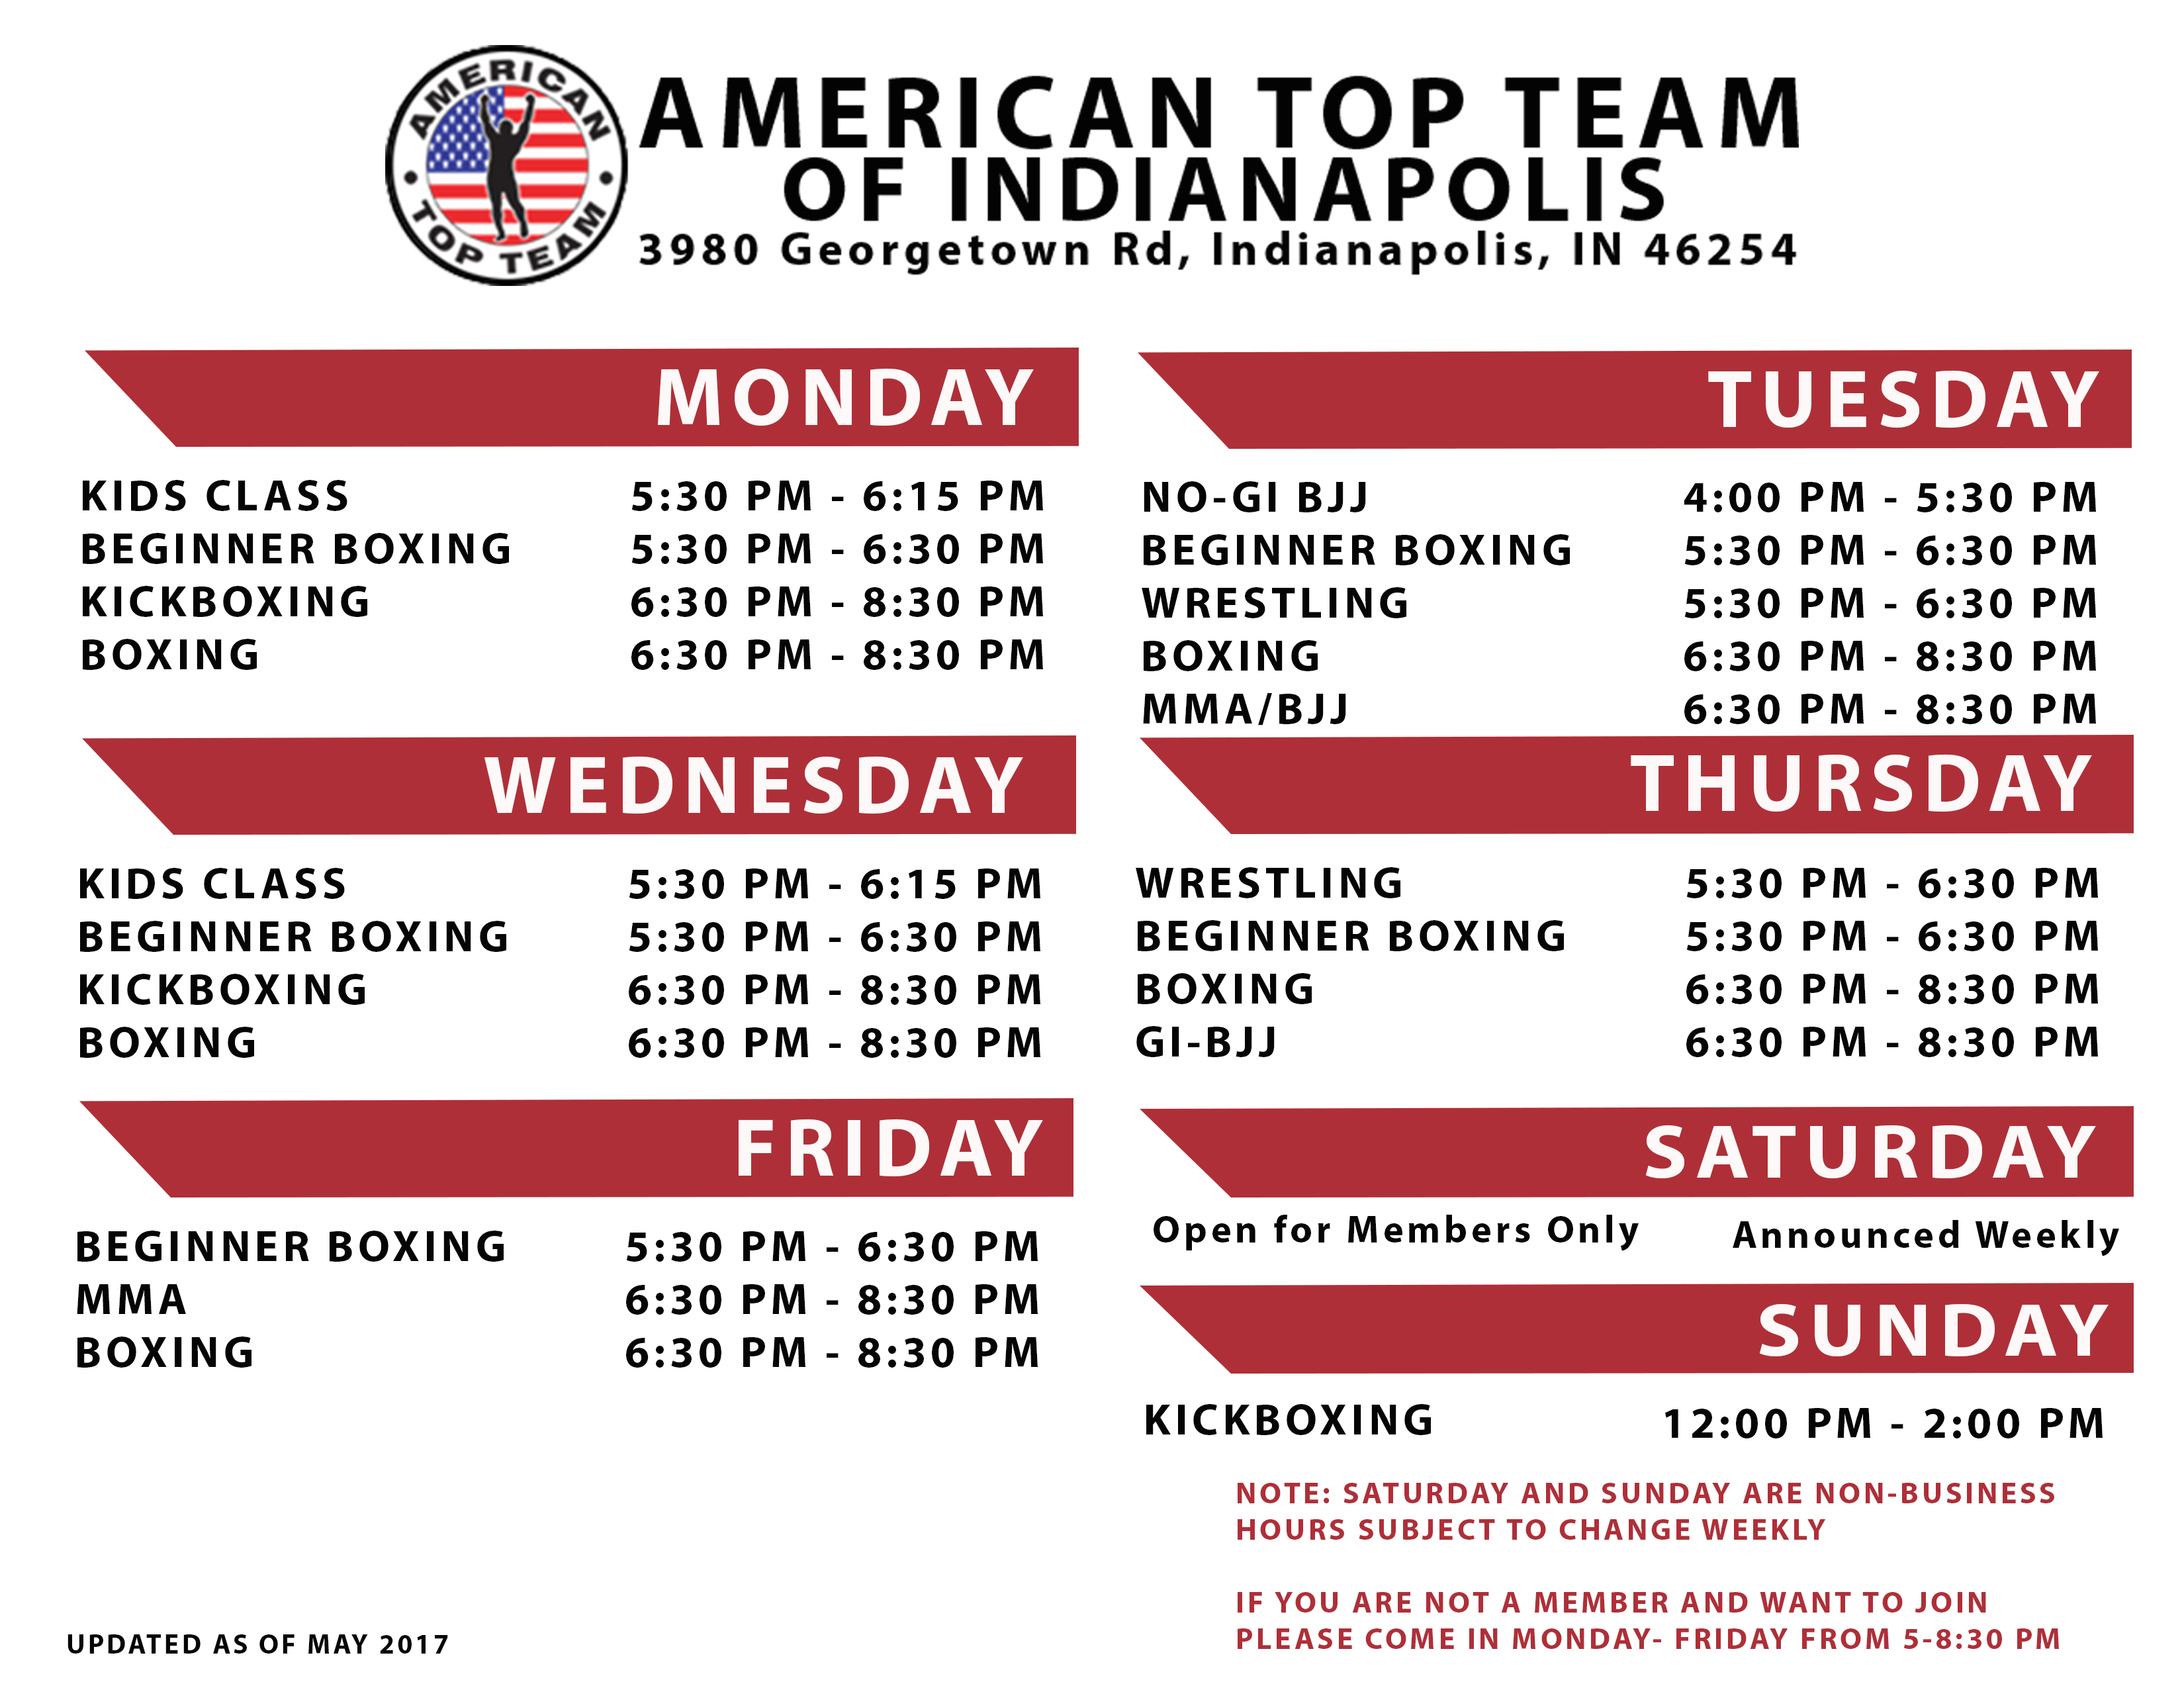 anytime fitness new orleans kickboxing class schedule